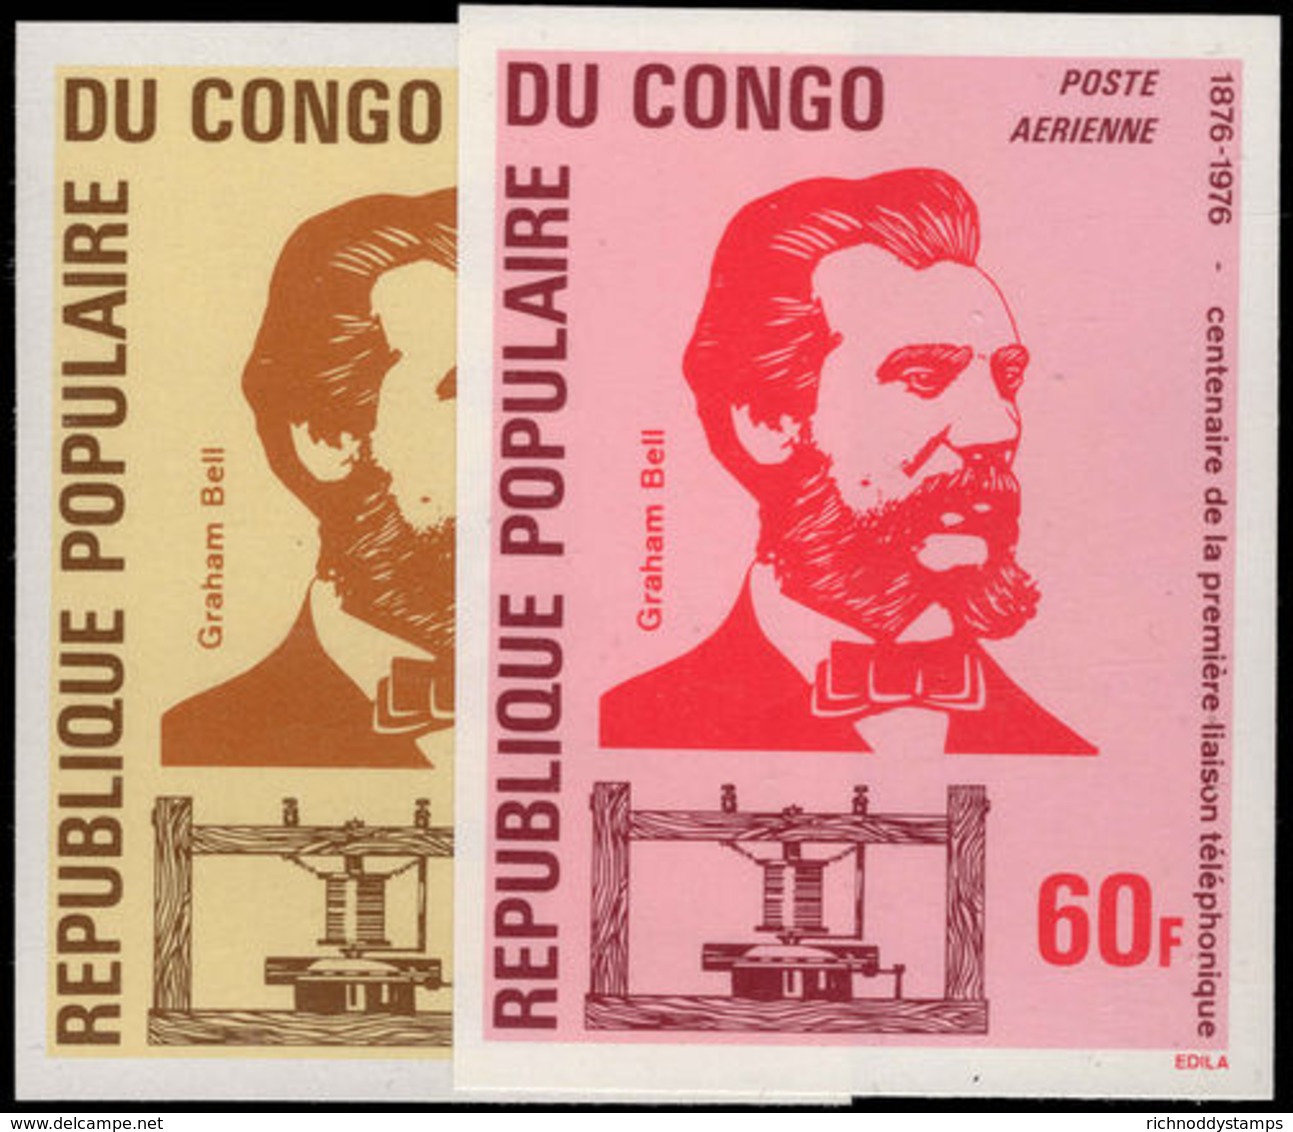 Congo Brazzaville 1976 Telephone Imperf Unmounted Mint. - Mint/hinged